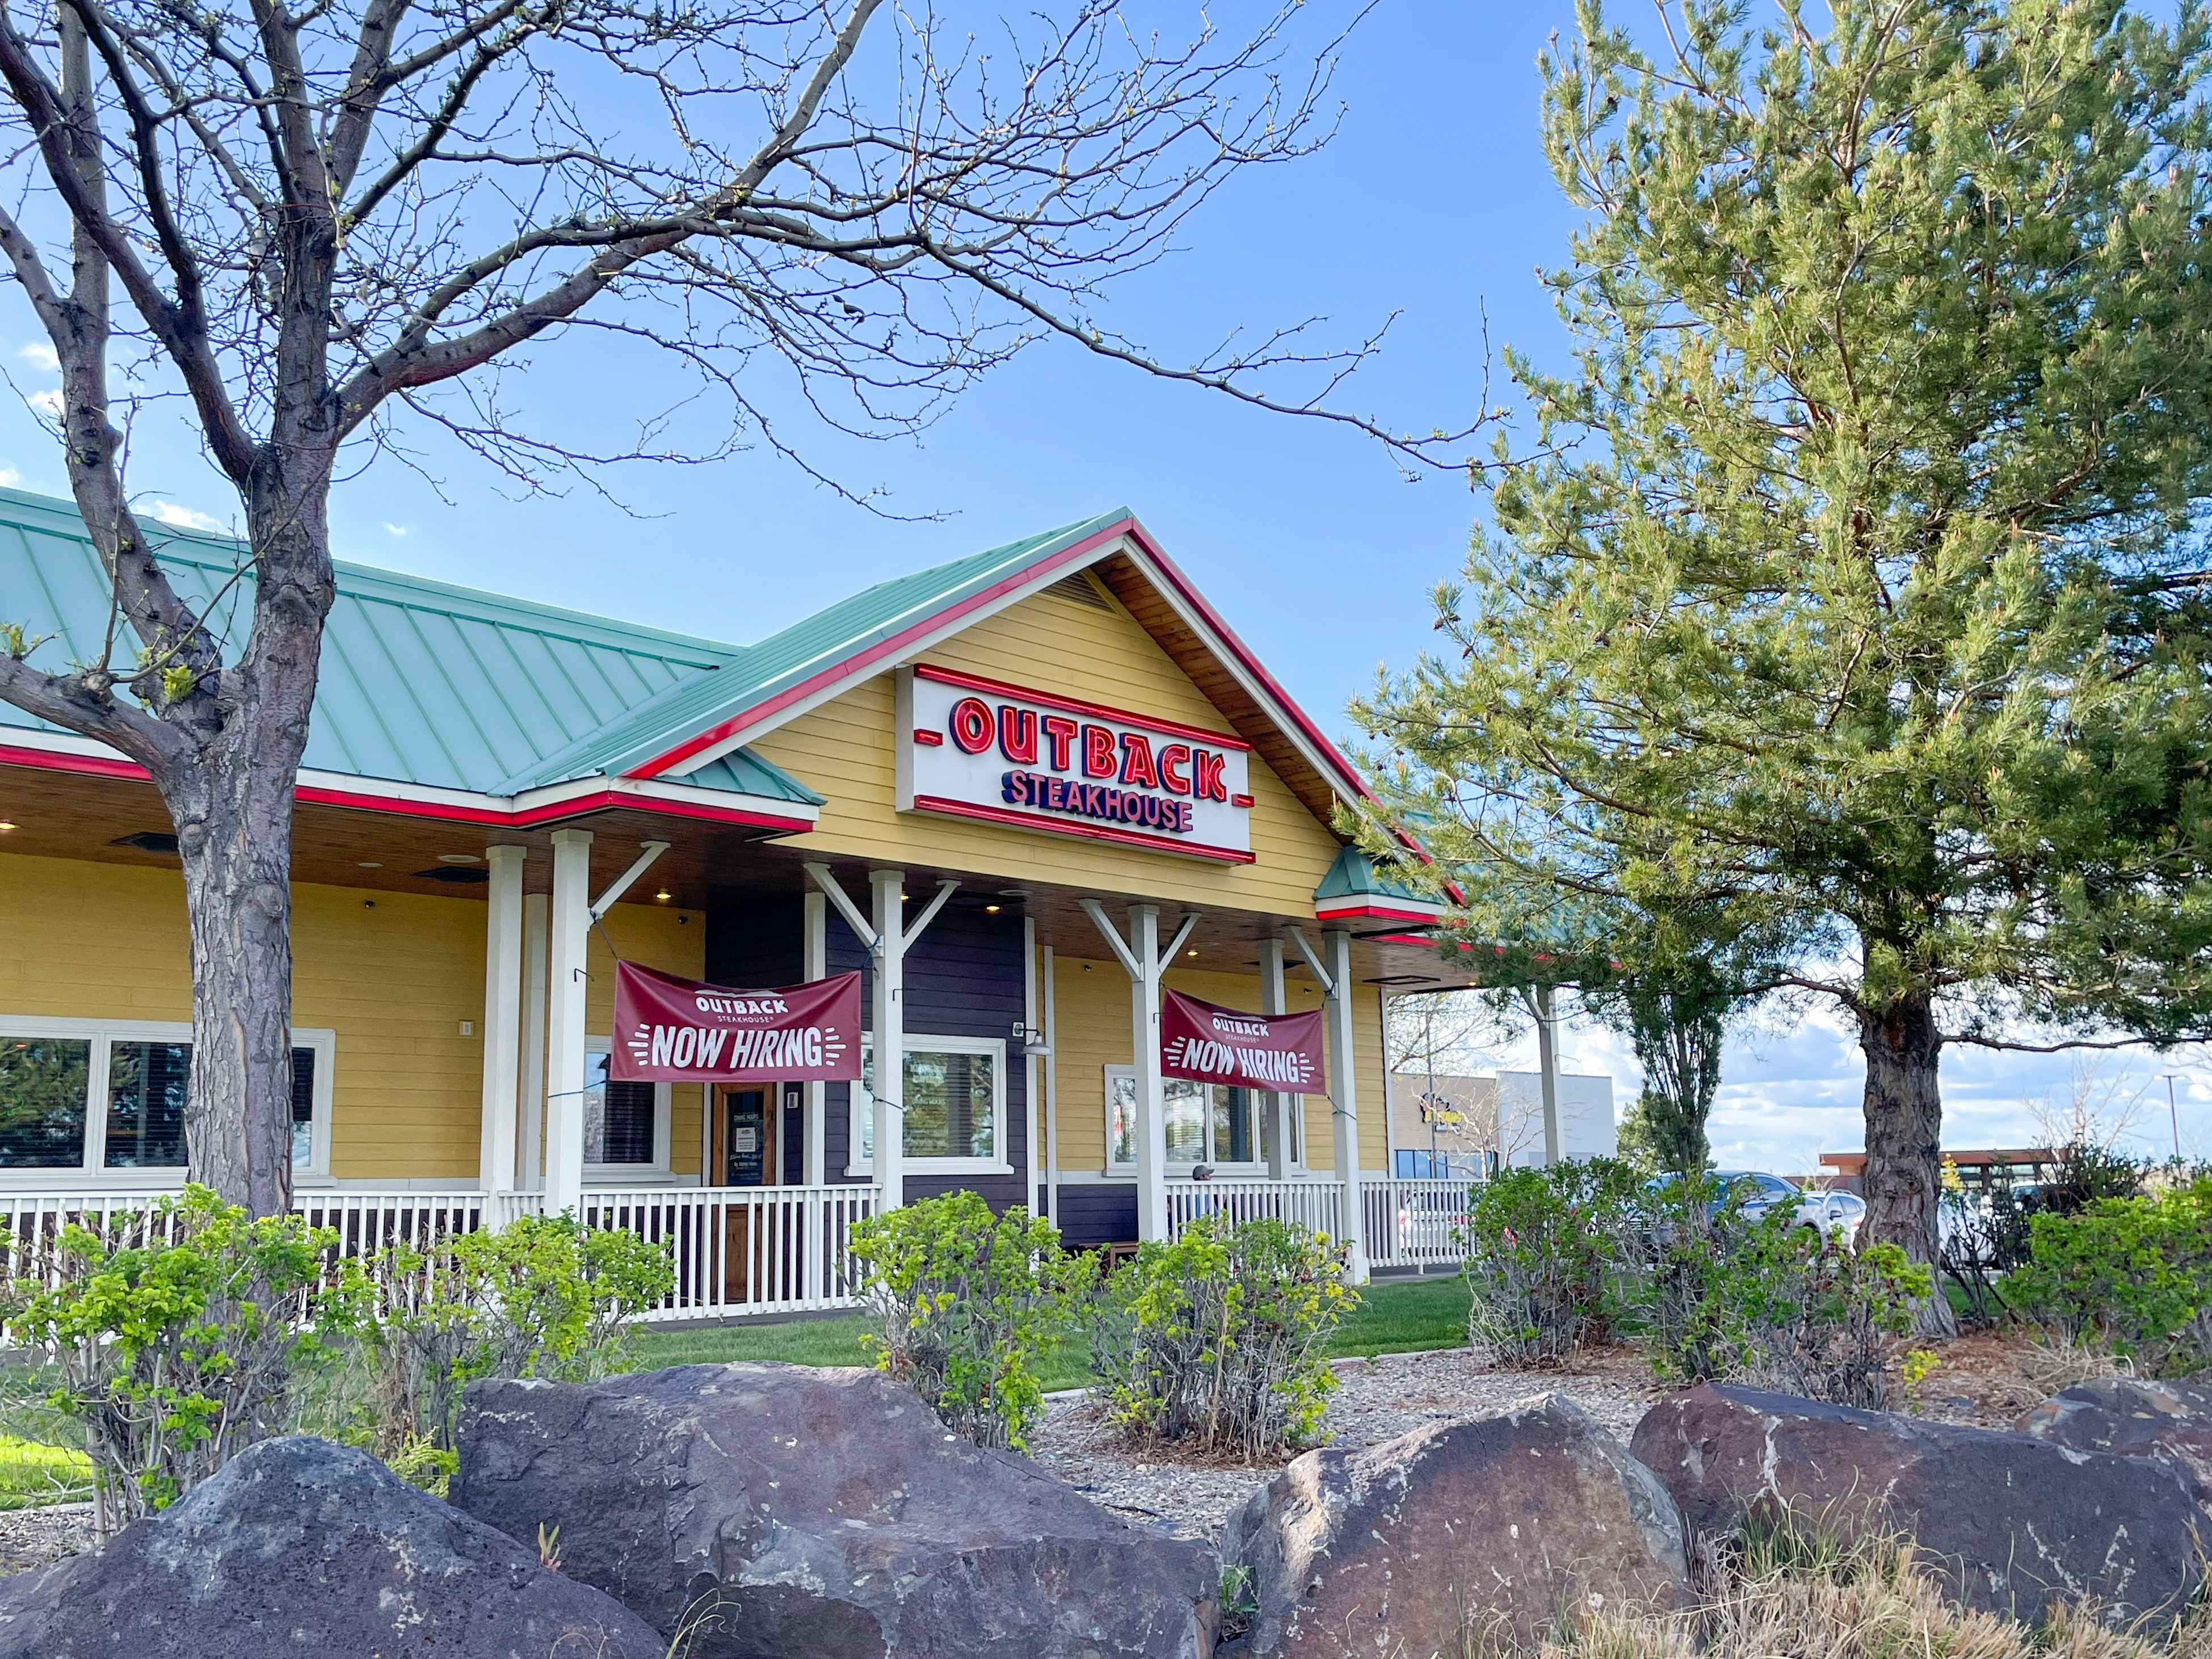 An Outback Steakhouse storefront with trees and rocks in the foreground.